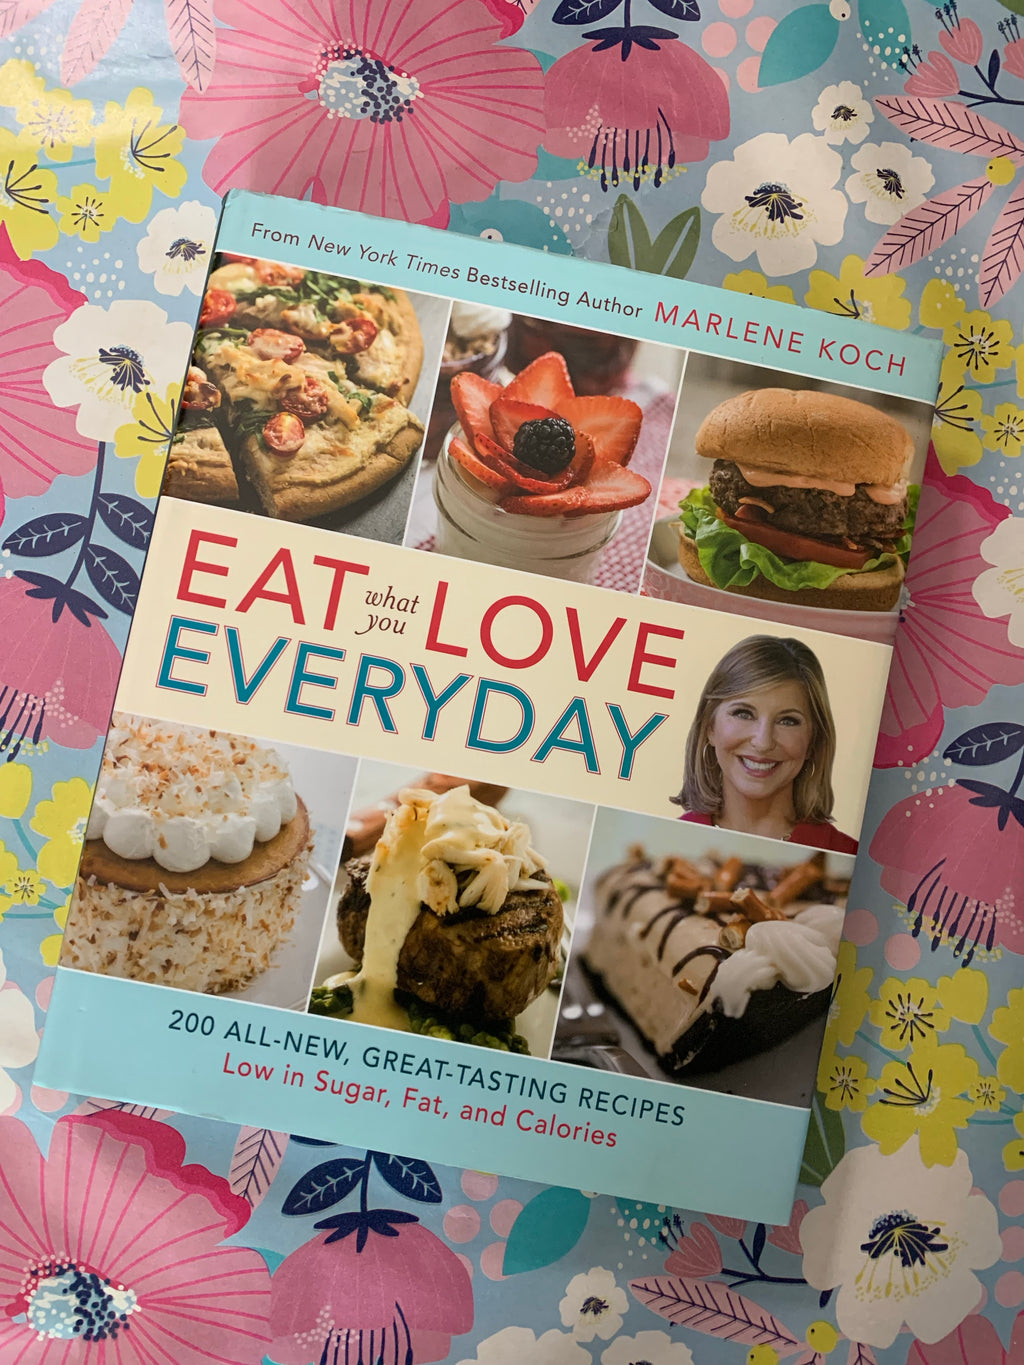 Eat What You Love Everyday- By Marlene Koch